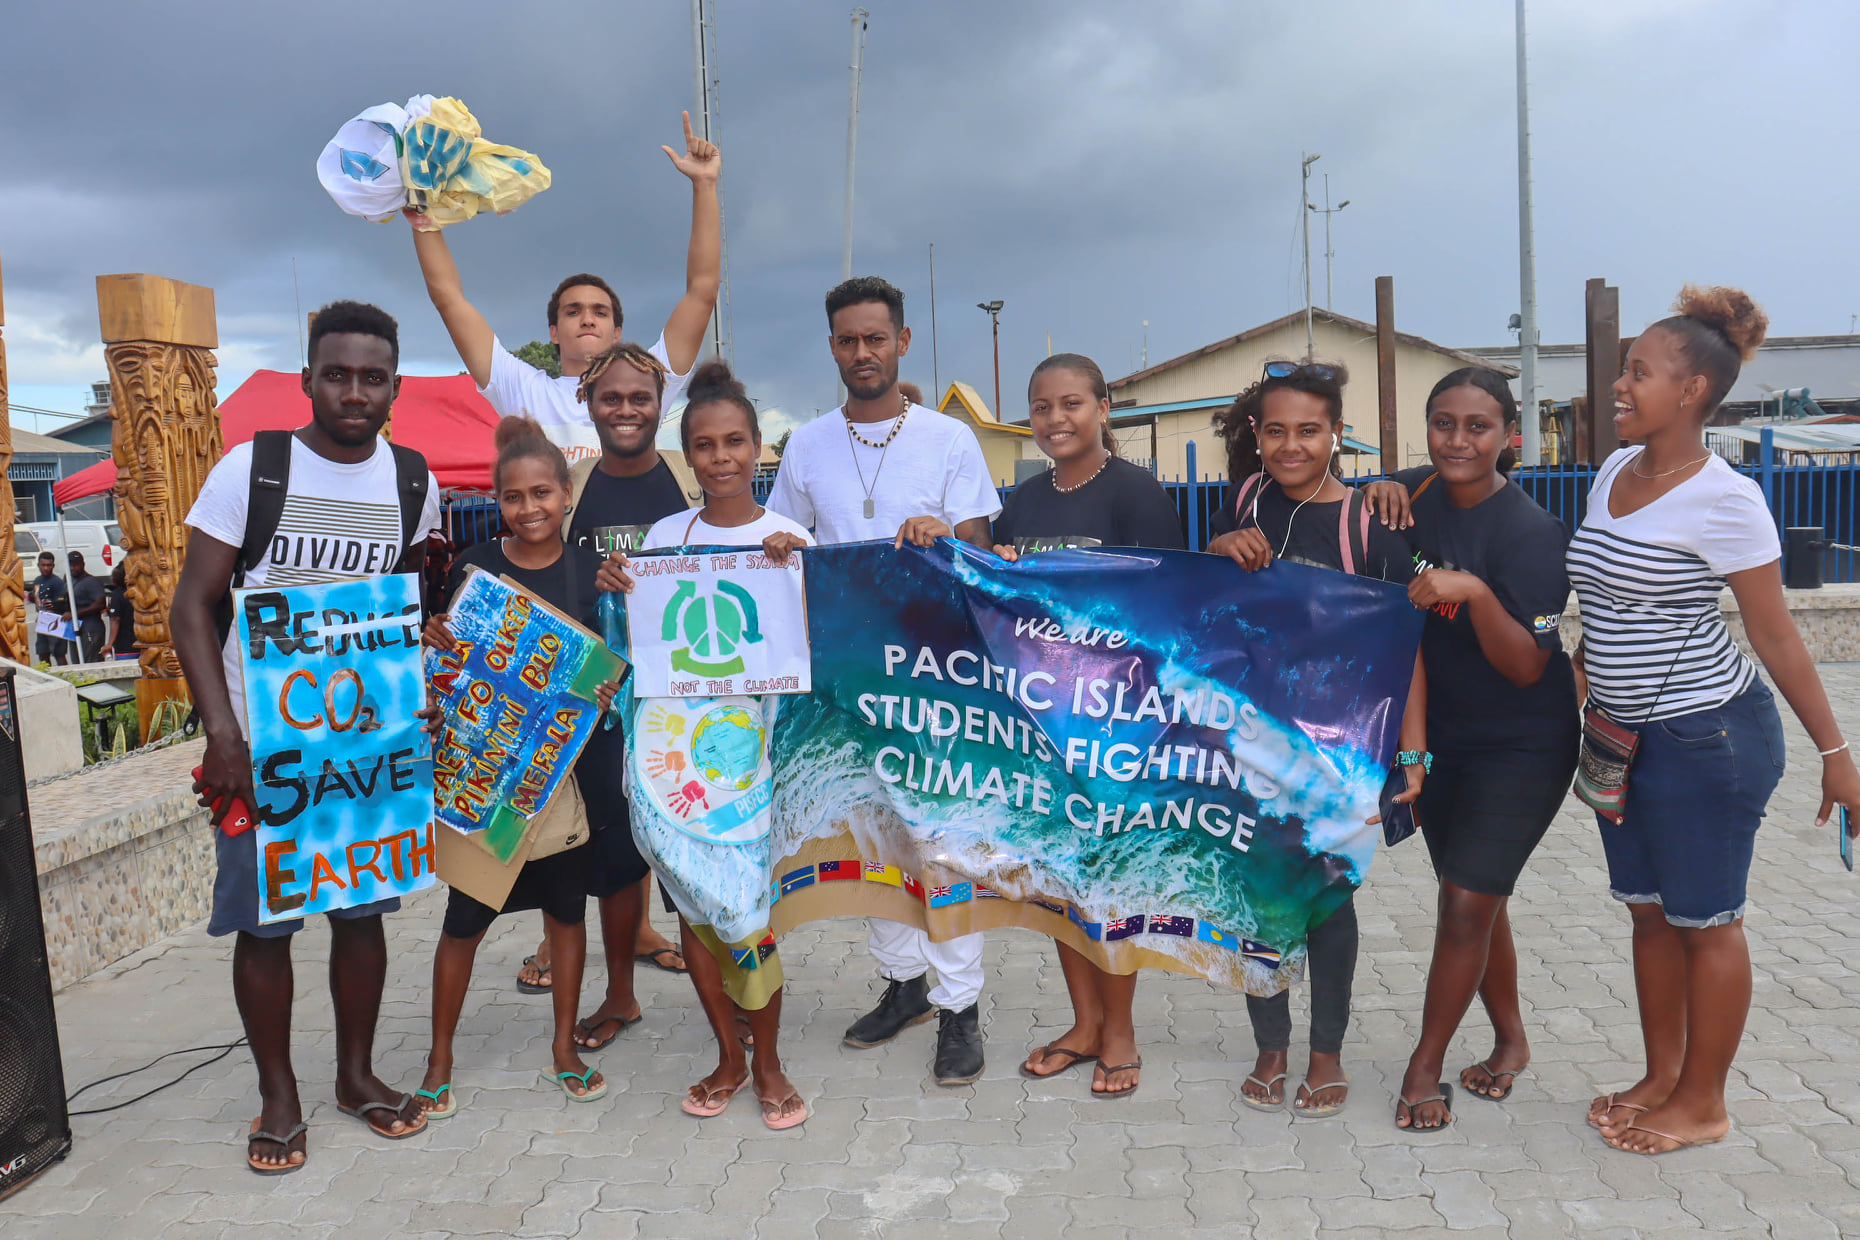 Pacific Islands Students Fighting Climate Change